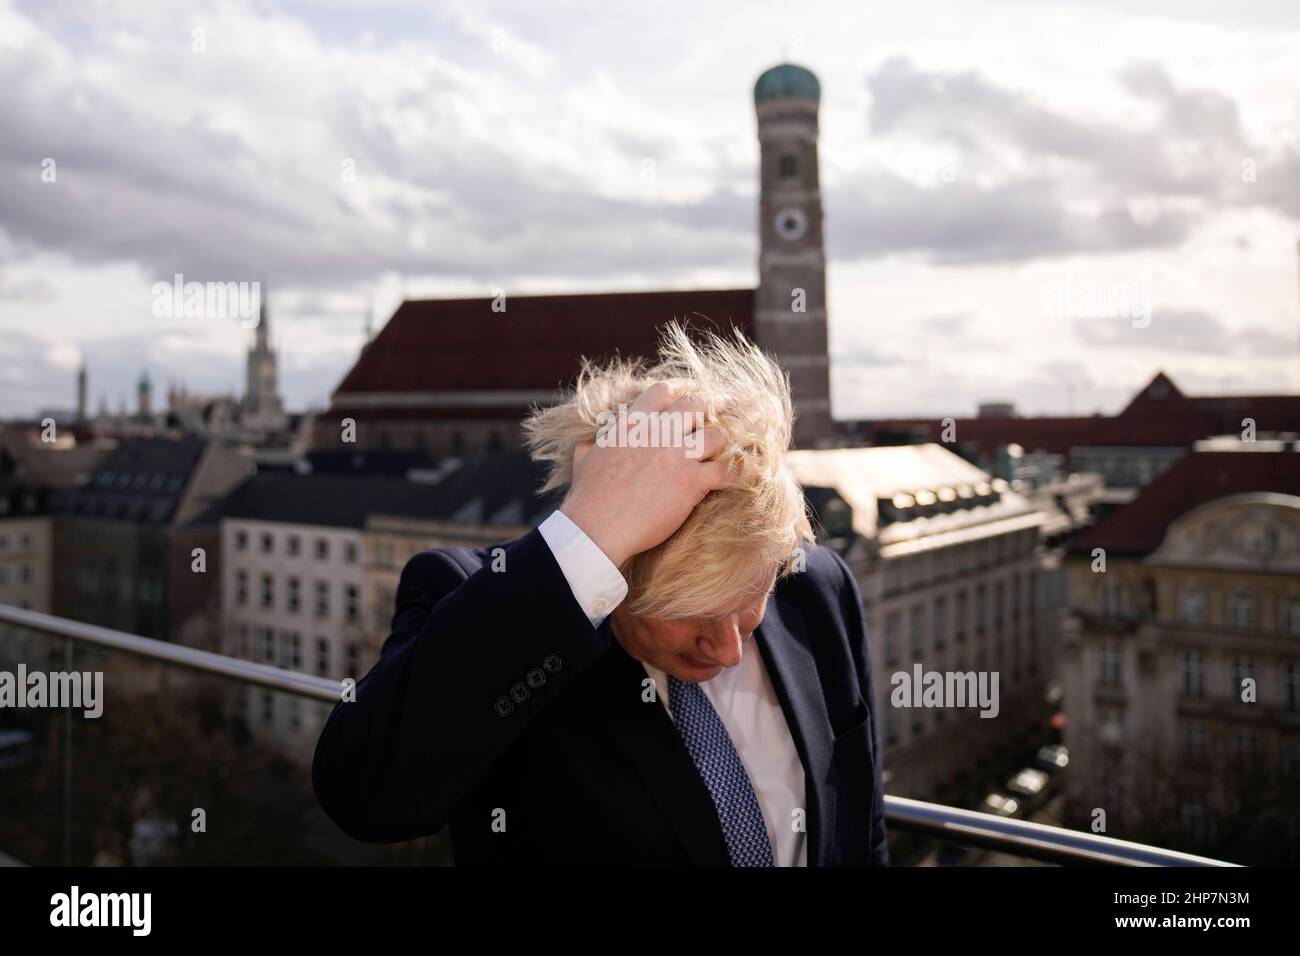 Prime Minister Boris Johnson rubbing his hair to get ready for a interview during the Munich Security Conference in Germany where he is meeting with world leaders to discuss tensions in eastern Europe. Picture date: Saturday February 19, 2022. Stock Photo